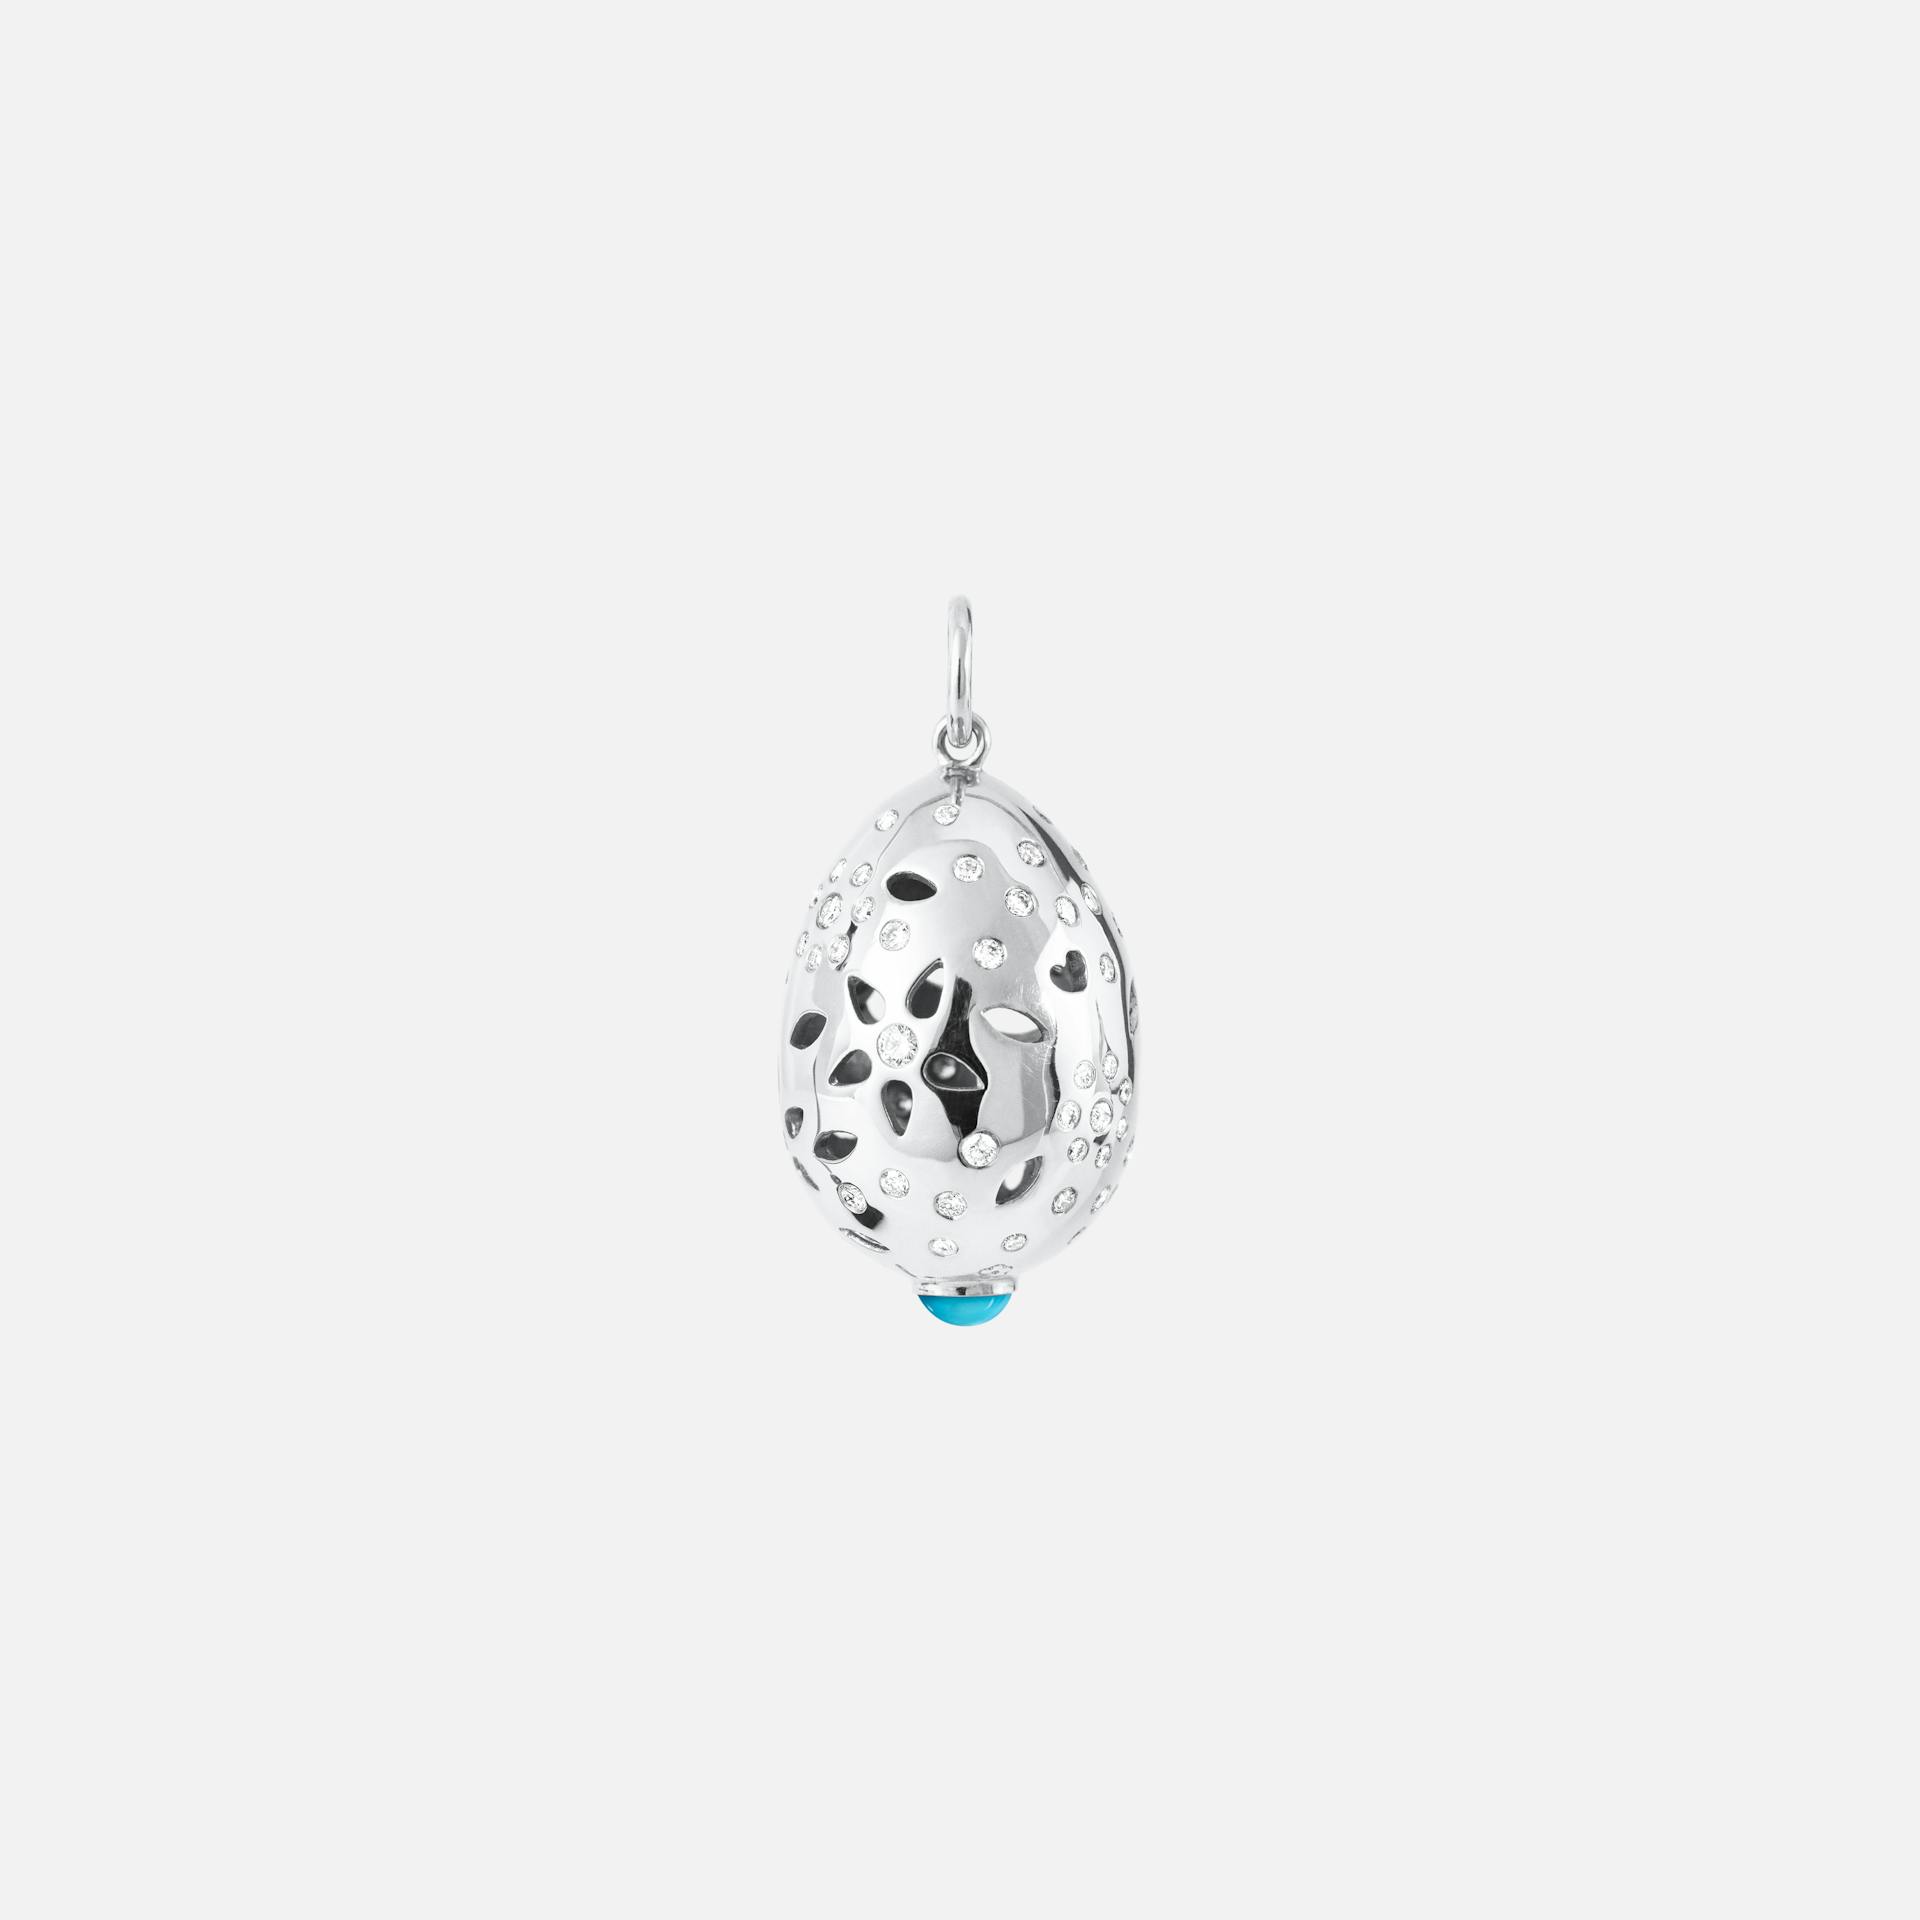 Lace Pendant in White Gold with Diamonds & Turquoise   |  Ole Lynggaard Copenhagen